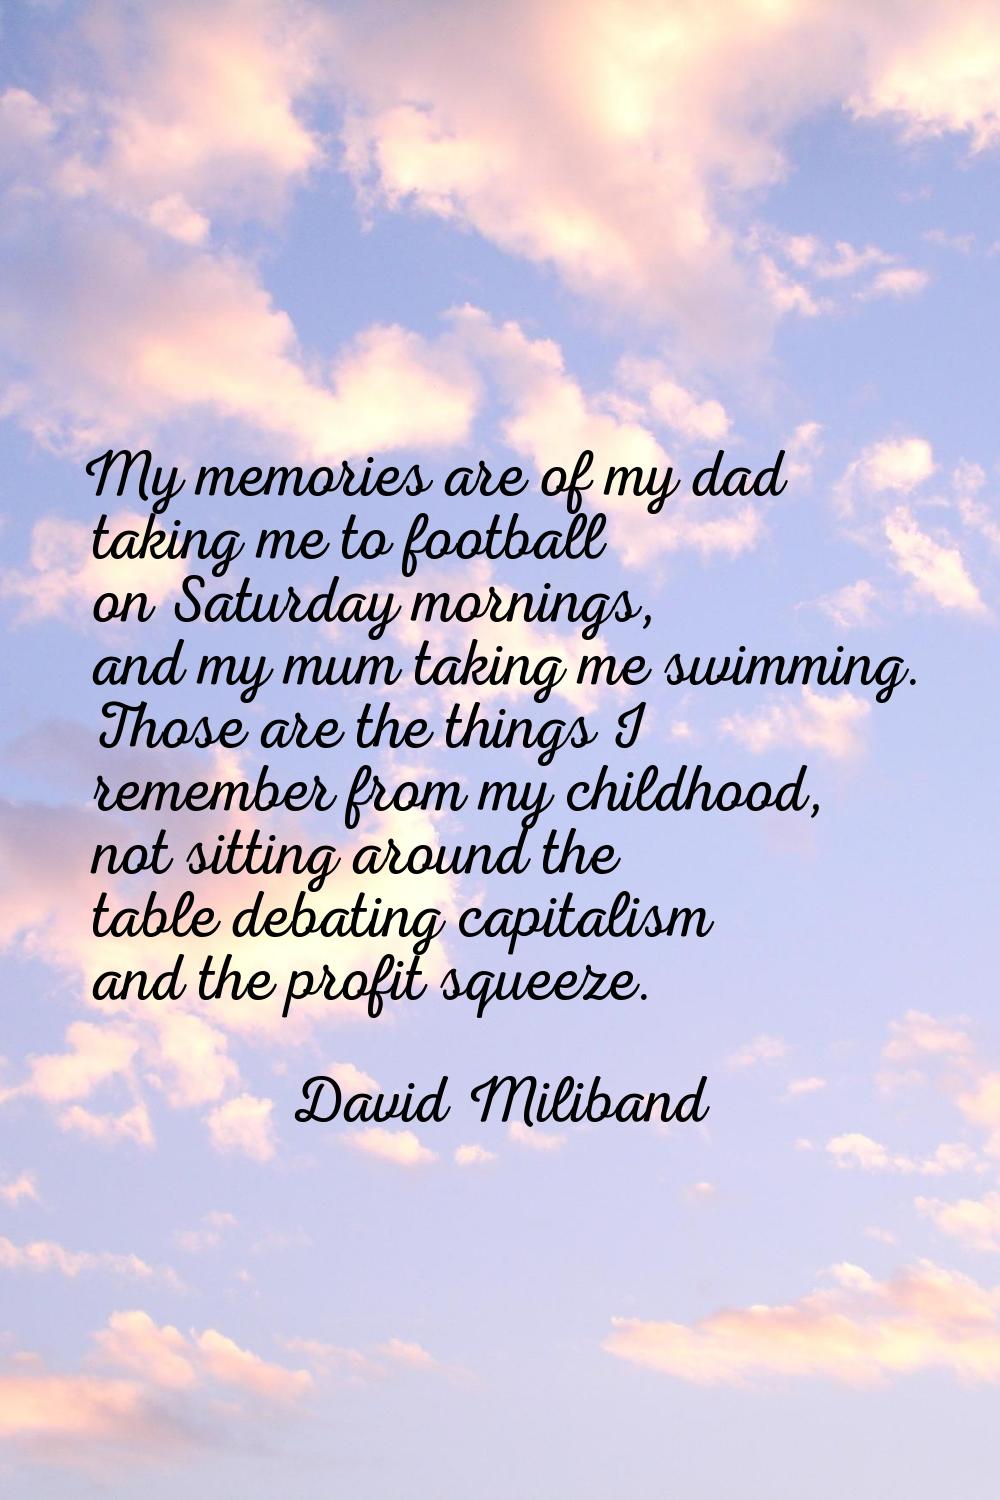 My memories are of my dad taking me to football on Saturday mornings, and my mum taking me swimming